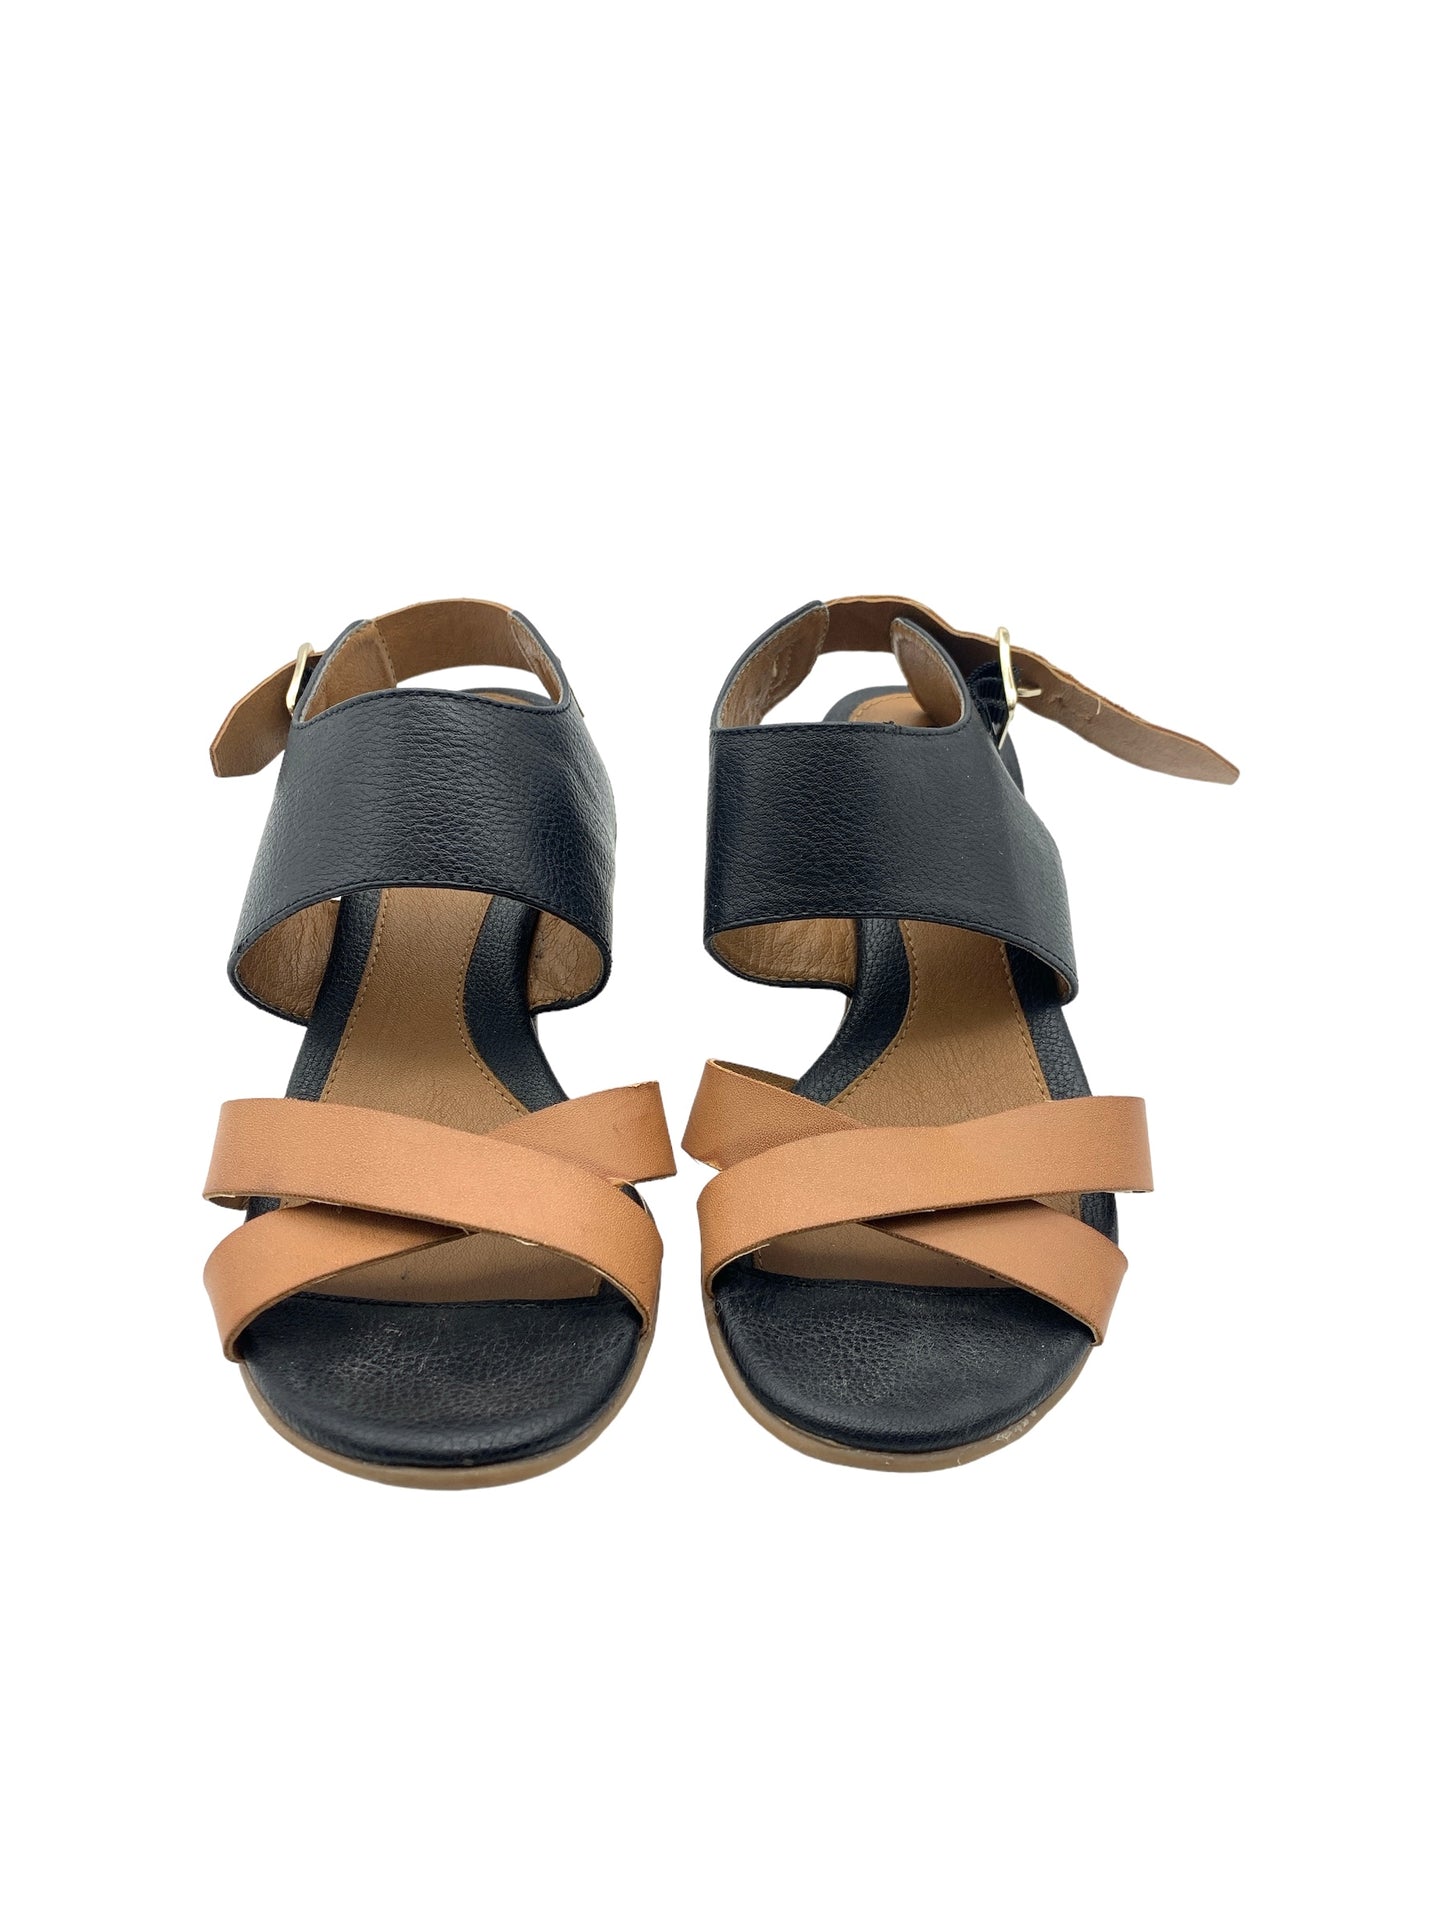 Sandals Heels Block By Sofft  Size: 6